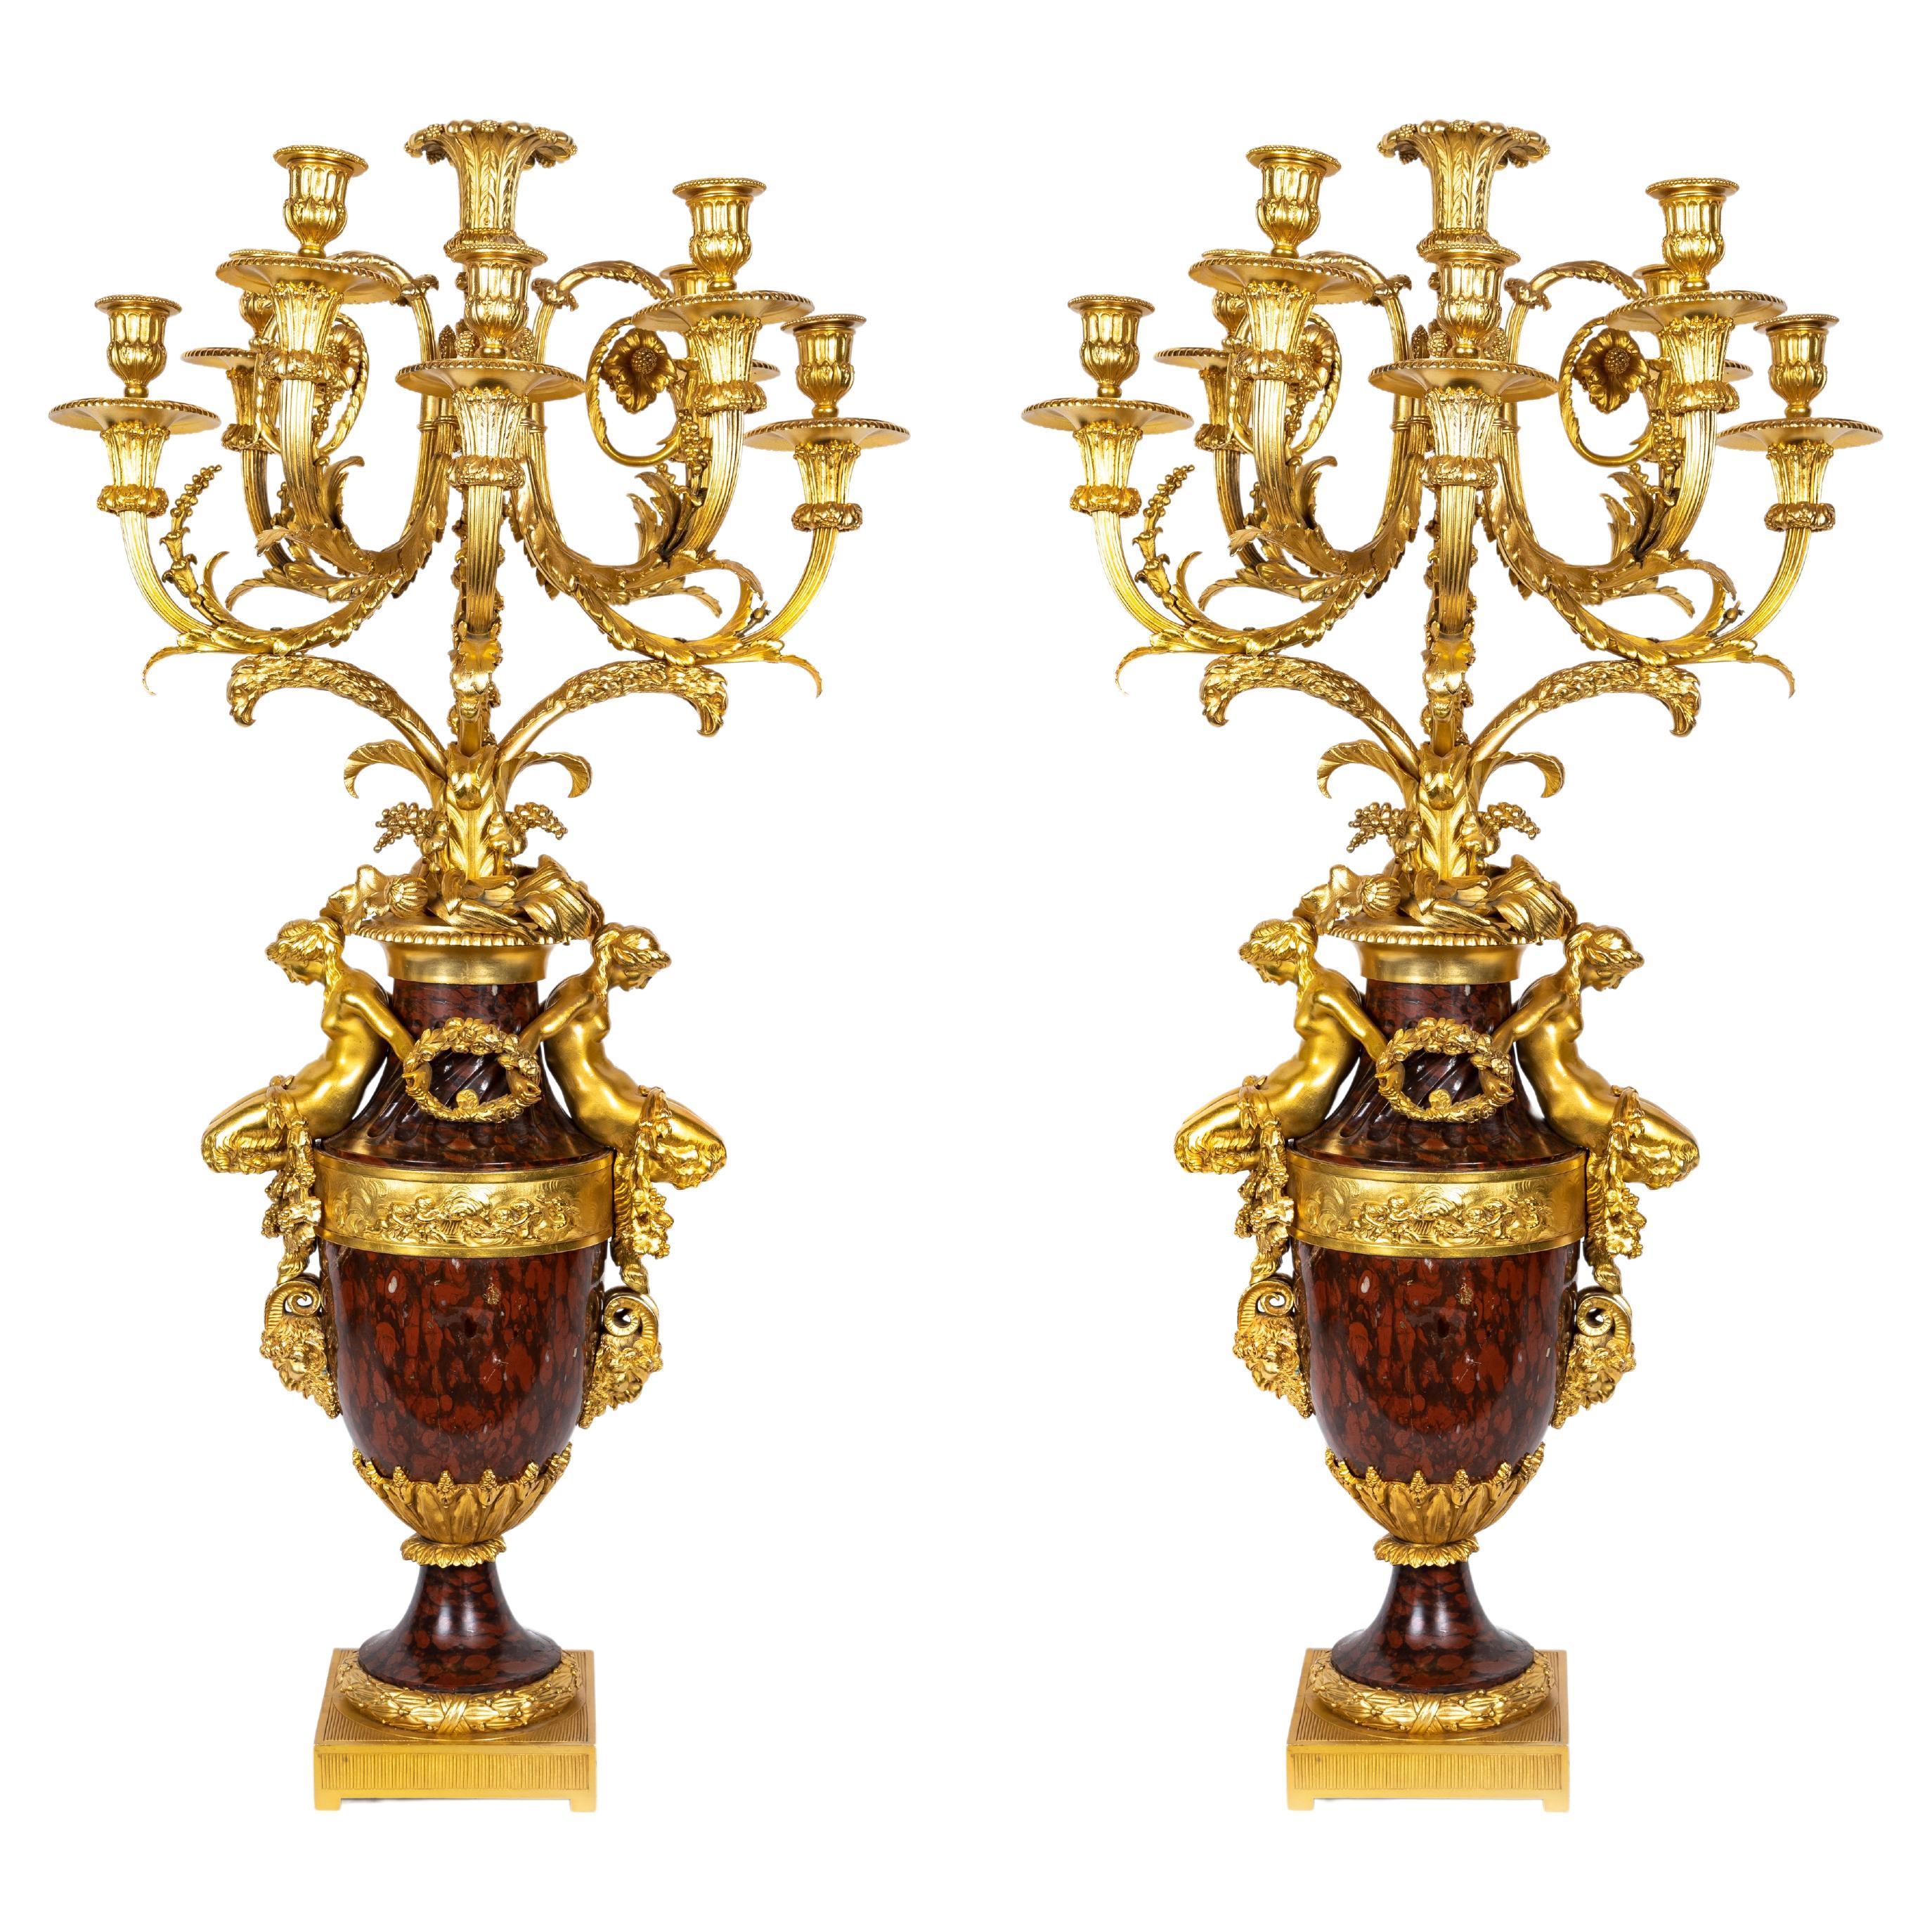 A Pair of Large Antique French Louis XVI Gilt Bronze and Marble Candelabras For Sale